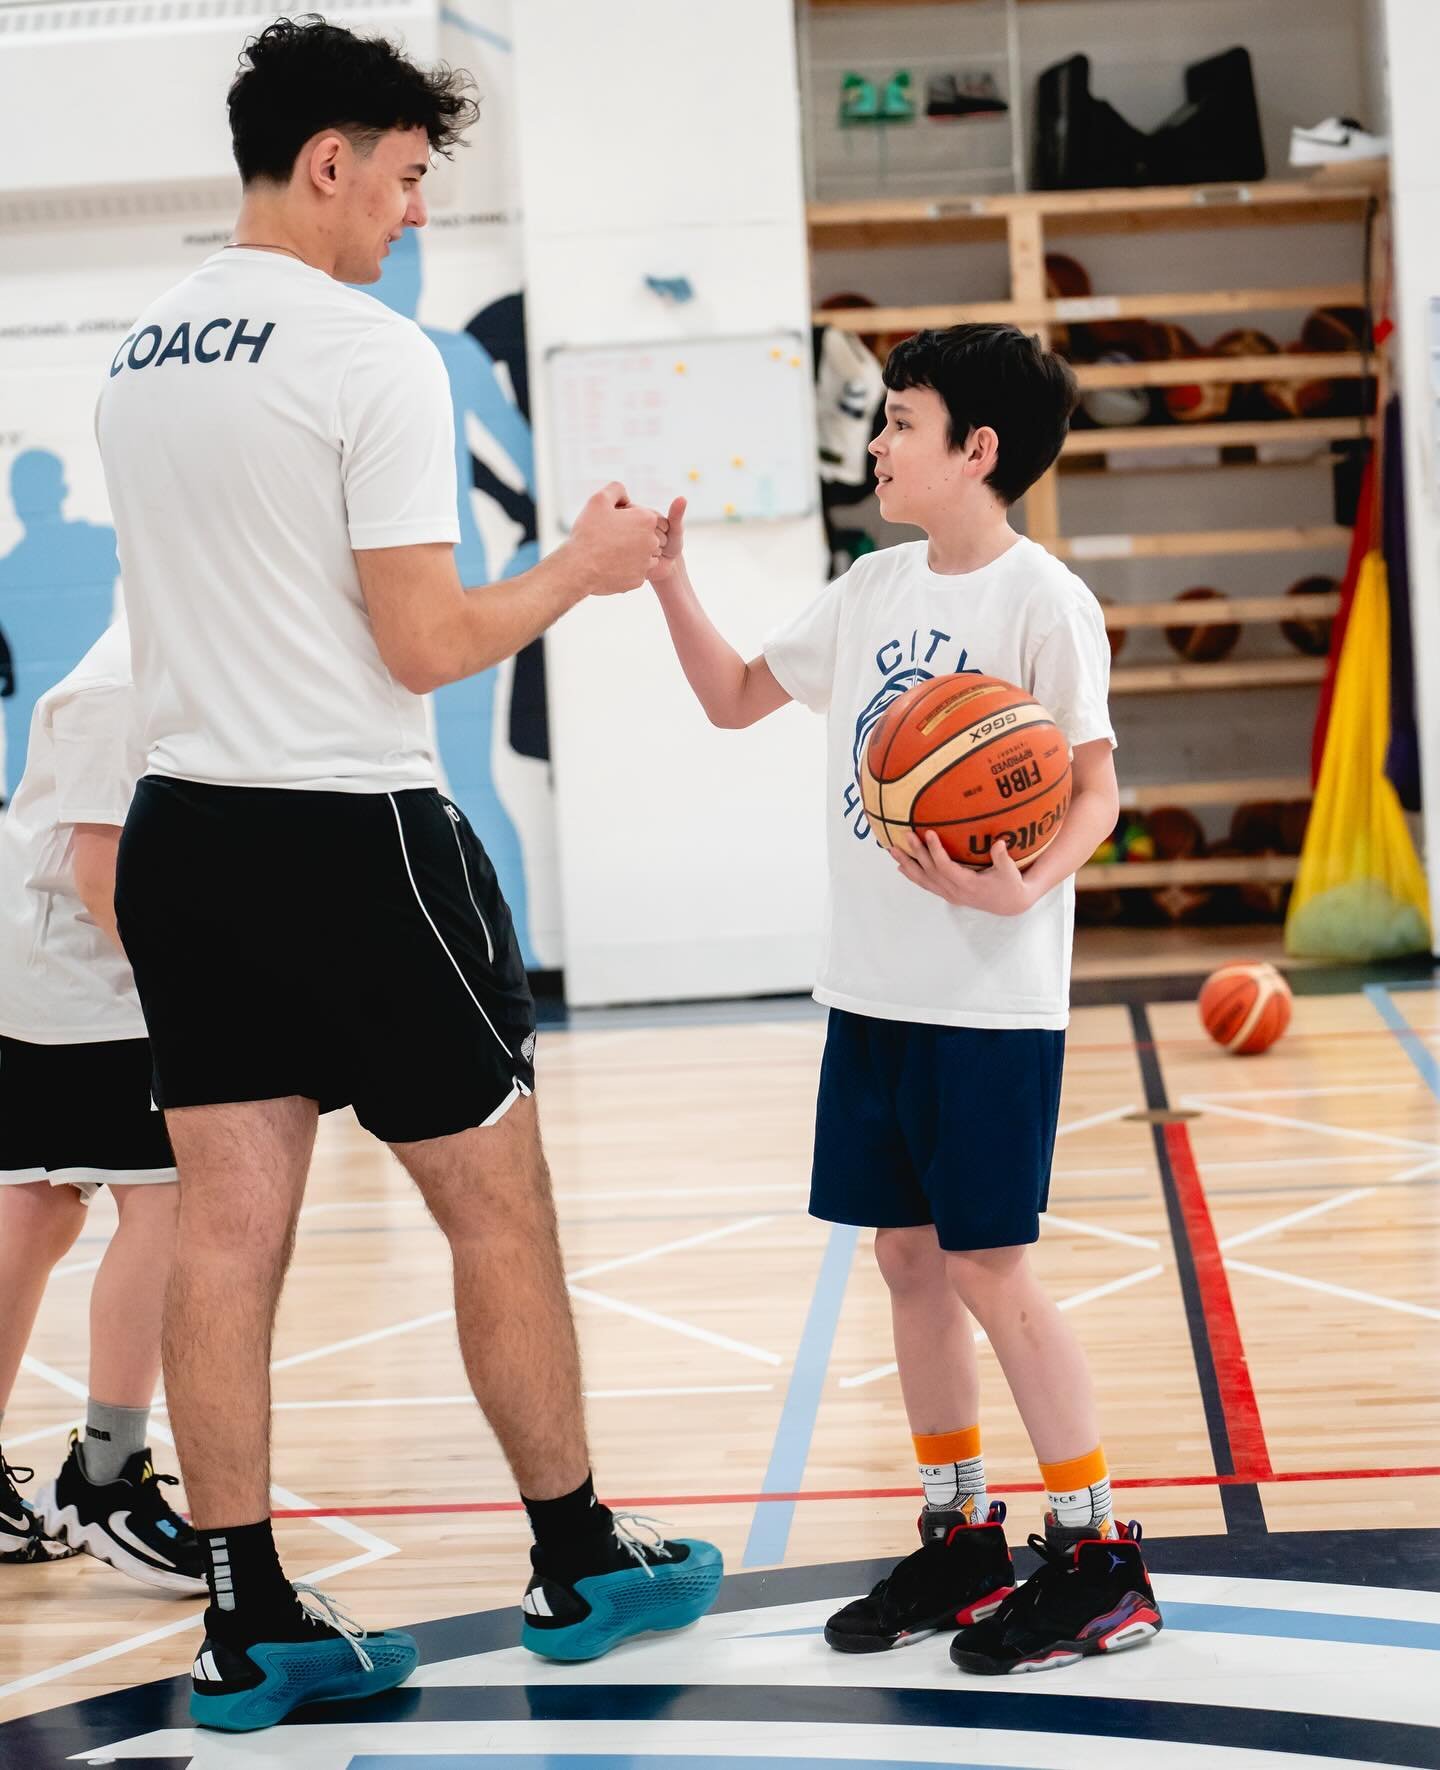 At City Hoops our coaches not only teach basketball skills but also life skills and building our hoopers confidence.

Check us out next season in Spring Term 2 starting May 6th. Registration is now open!

We are now running Hoops Sessions on Sundays!